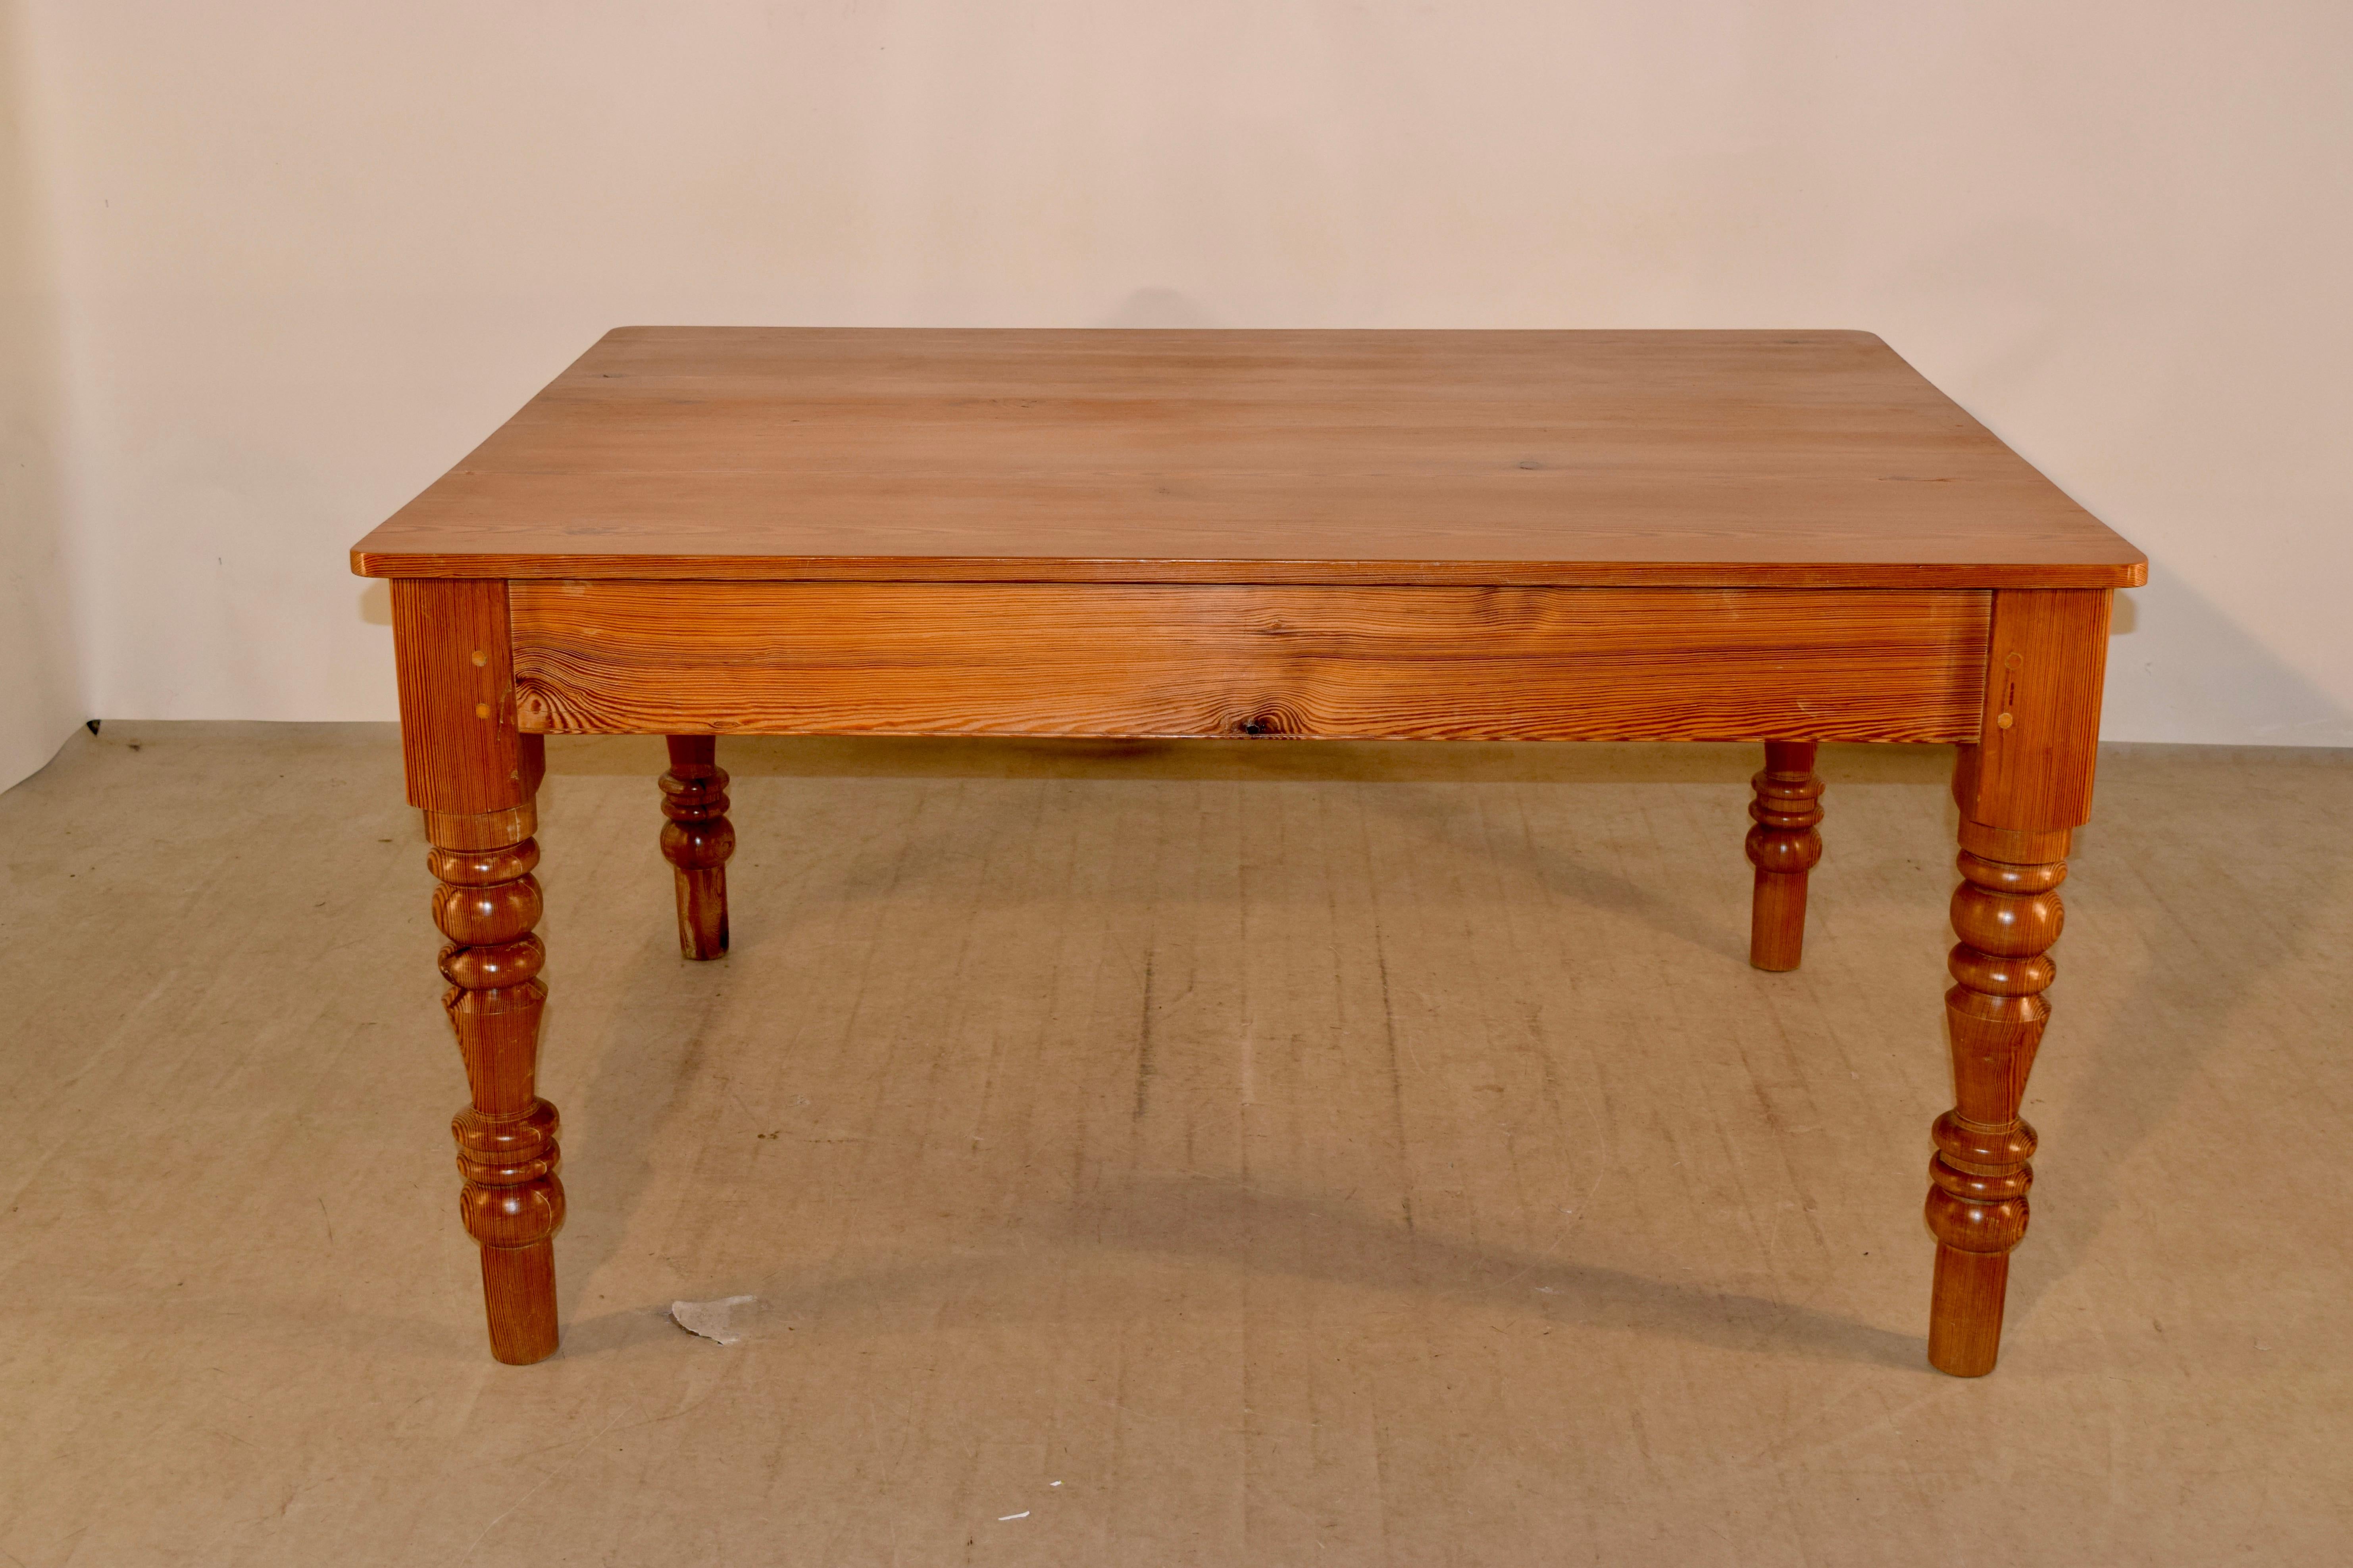 19th century English farm table made from pitch pine with wonderful graining on the top, following down to a simple apron and supported on hand turned legs. The apron measures 24.25 inches in height.